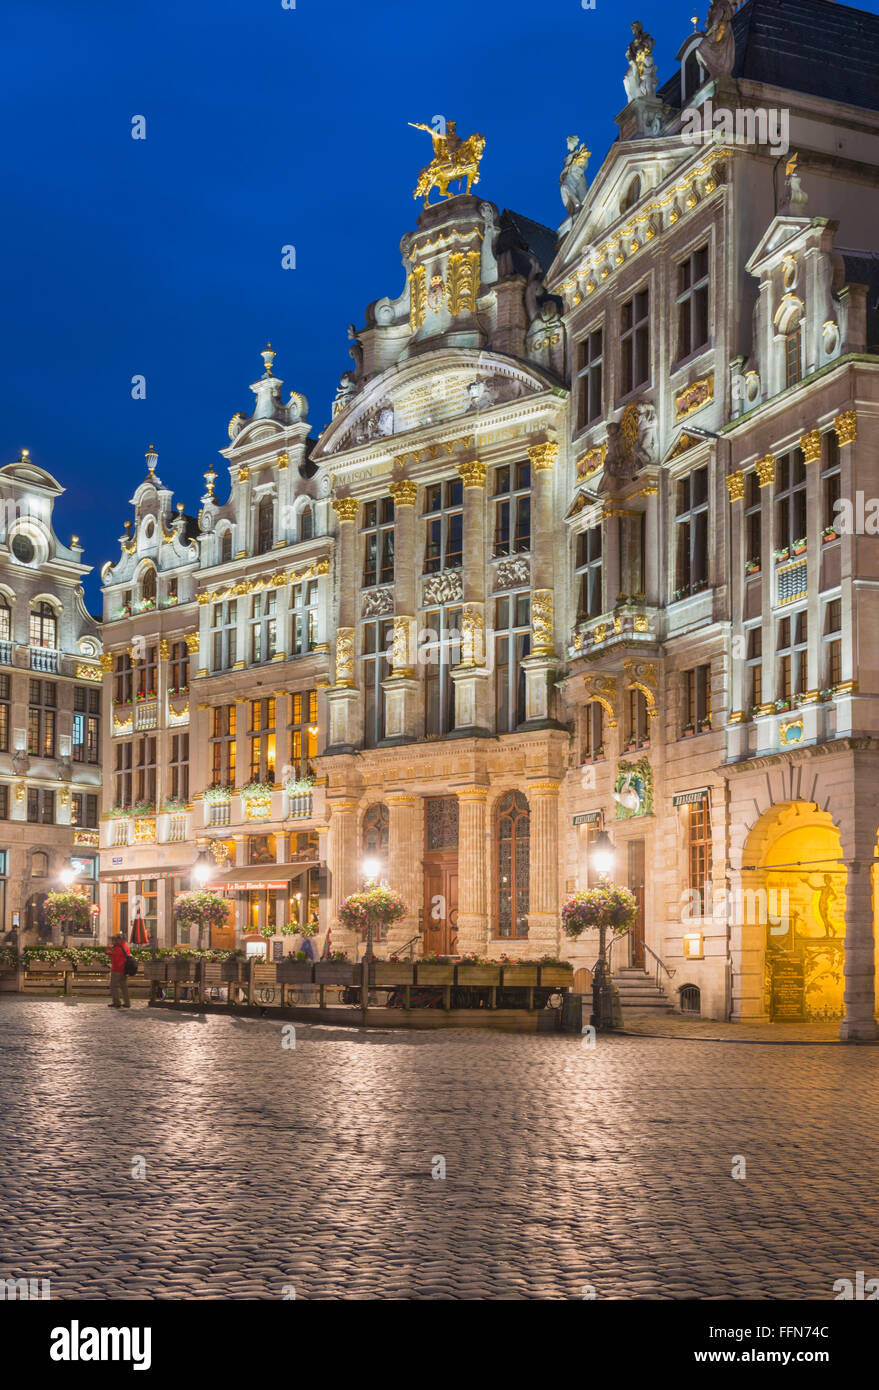 In the Brussels Grand Place, Belgium, Europe at night Stock Photo